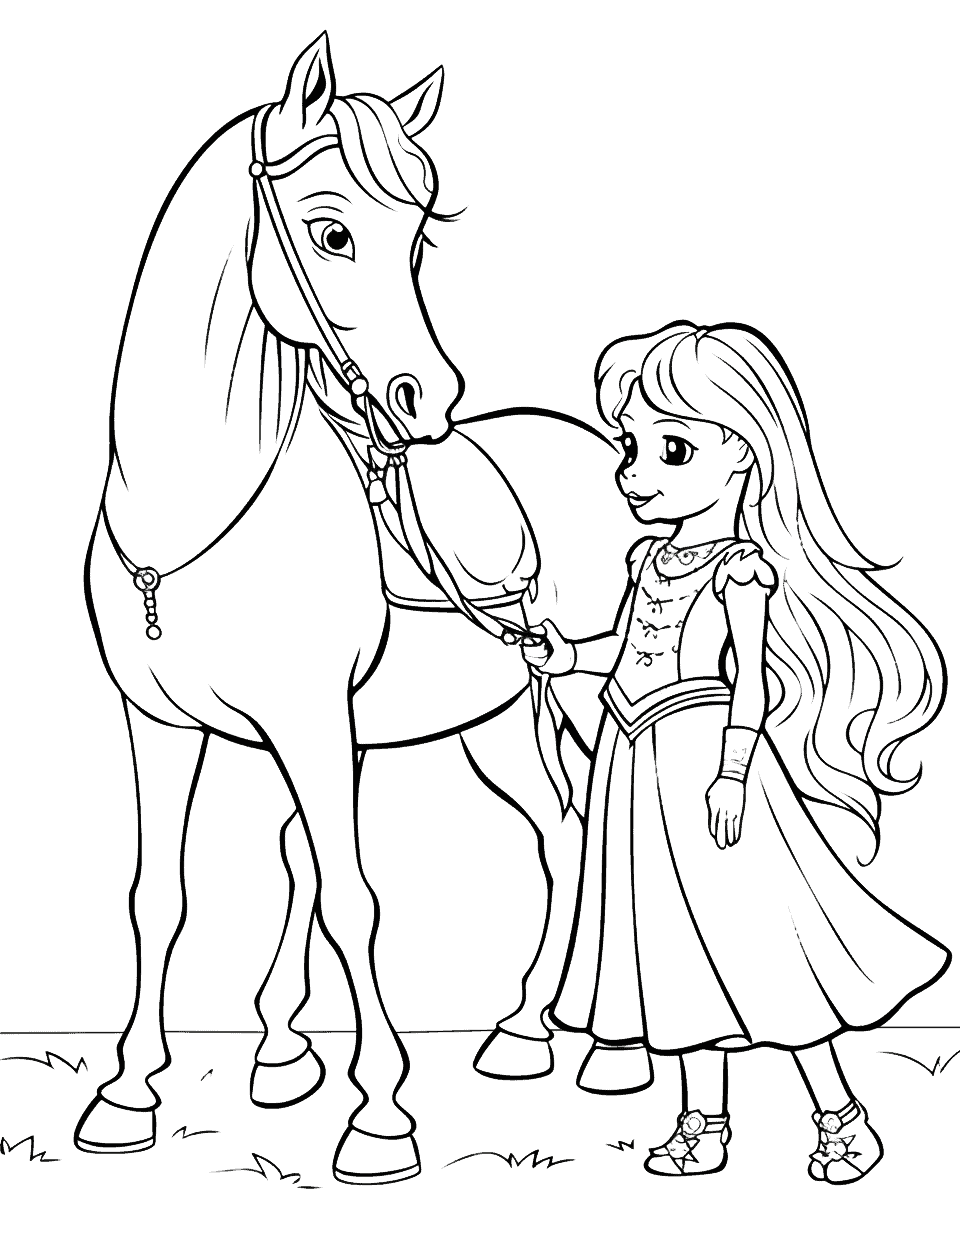 Pretty Princess and Her Pony Horse Coloring Page - A beautiful princess grooming her favorite pony in the royal stables.